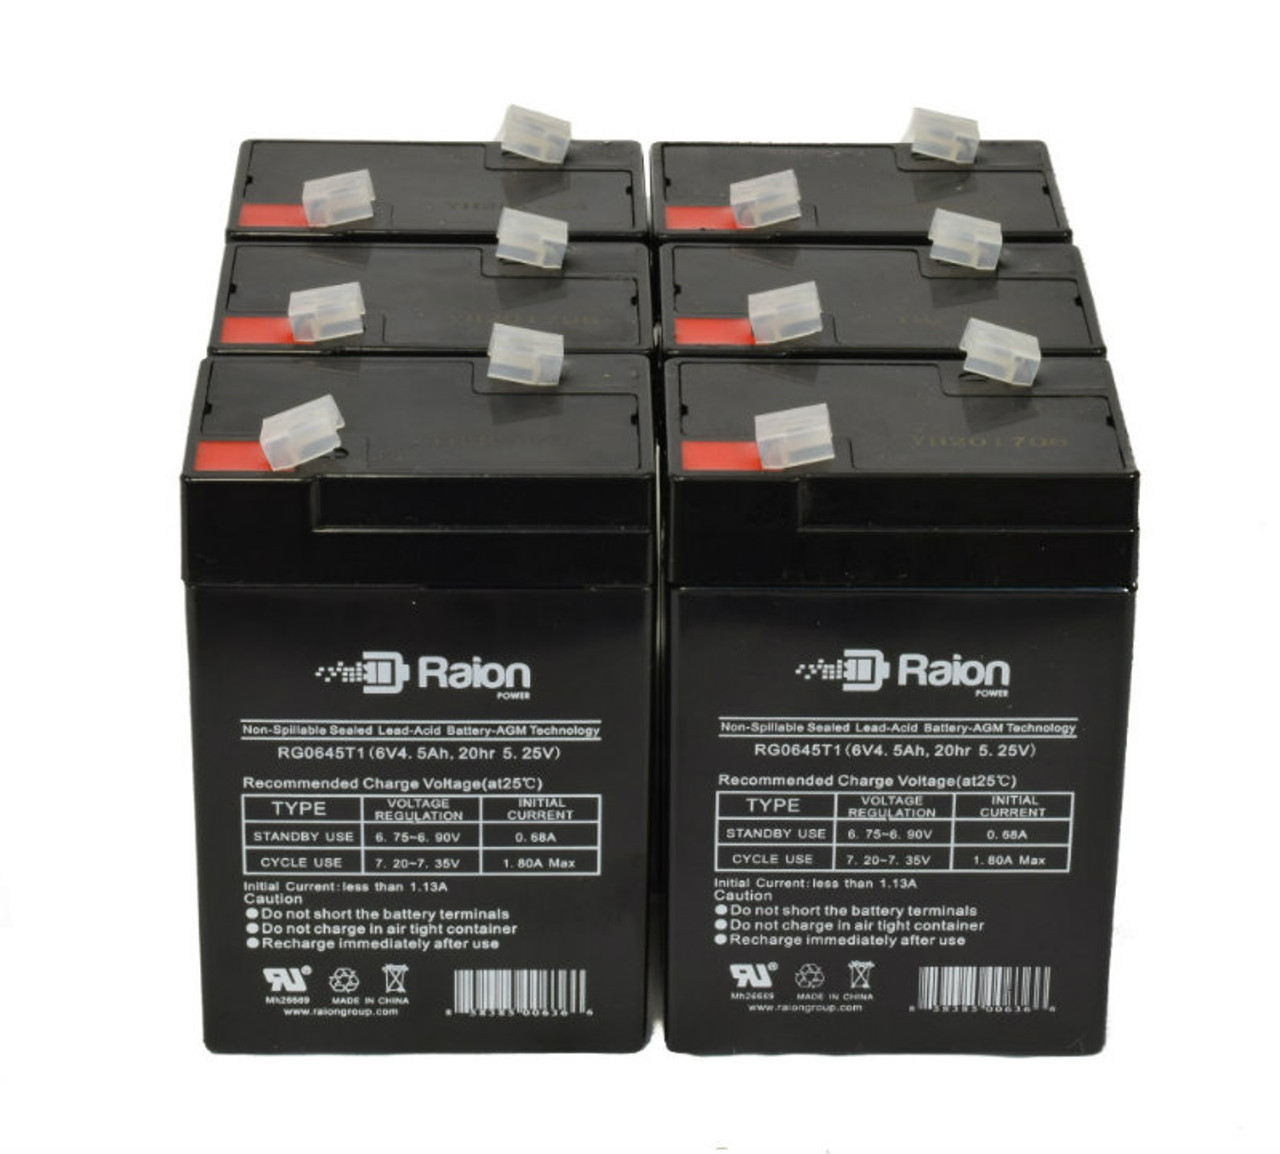 Raion Power 6 Volt 4.5Ah RG0645T1 Replacement Battery for MaxPower NP4.5-6H - 6 Pack